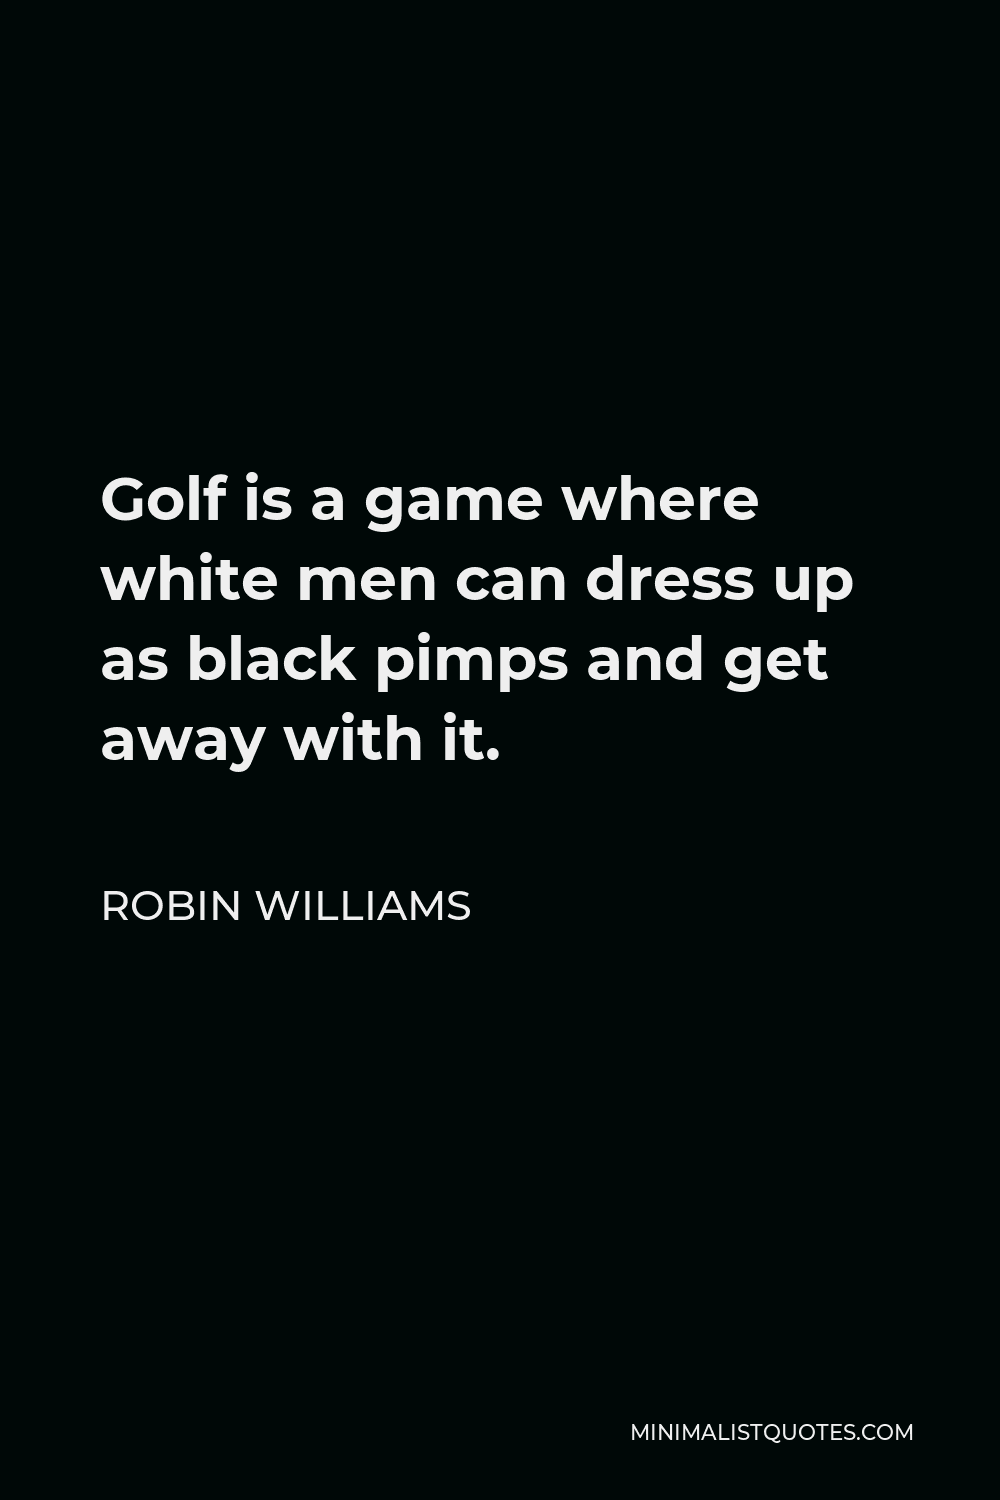 Robin Williams Quote - Golf is a game where white men can dress up as black pimps and get away with it.